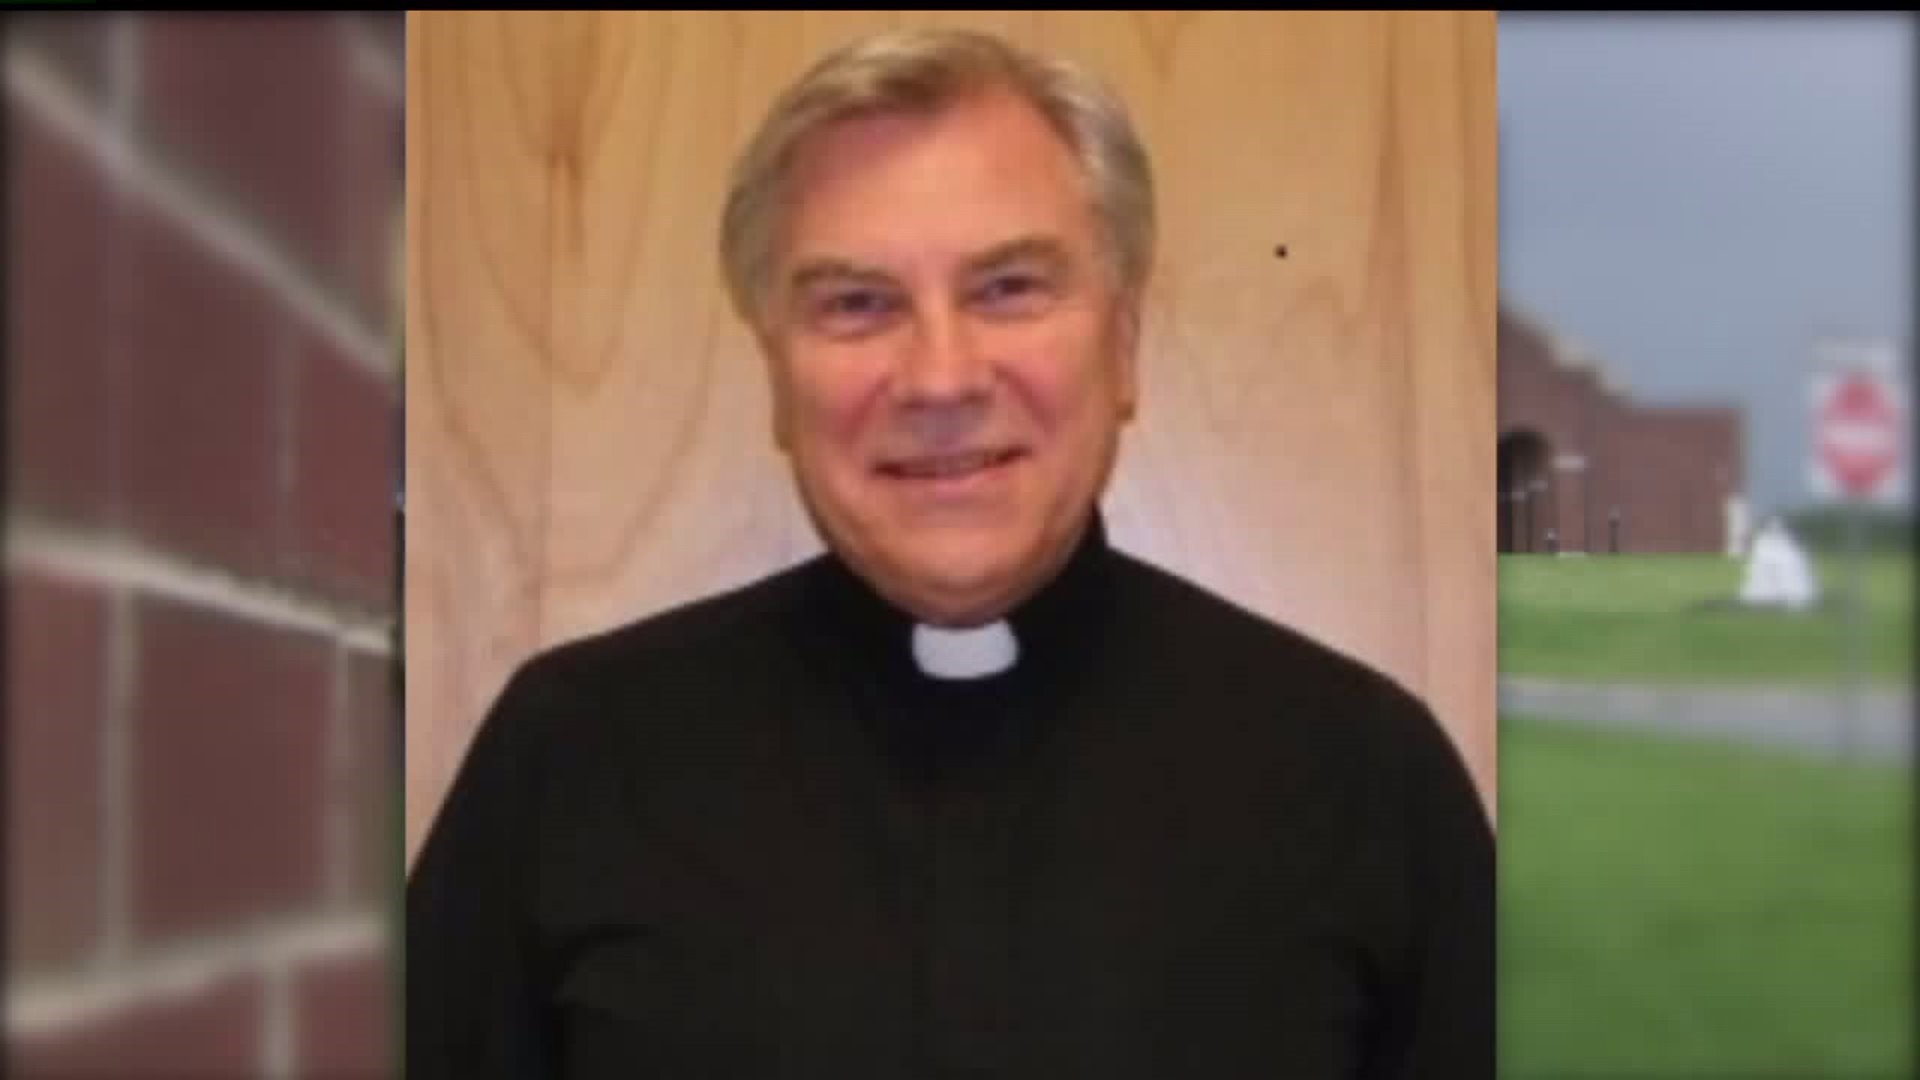 Diocese of Harrisburg priest takes leave of absence following release of grand jury report